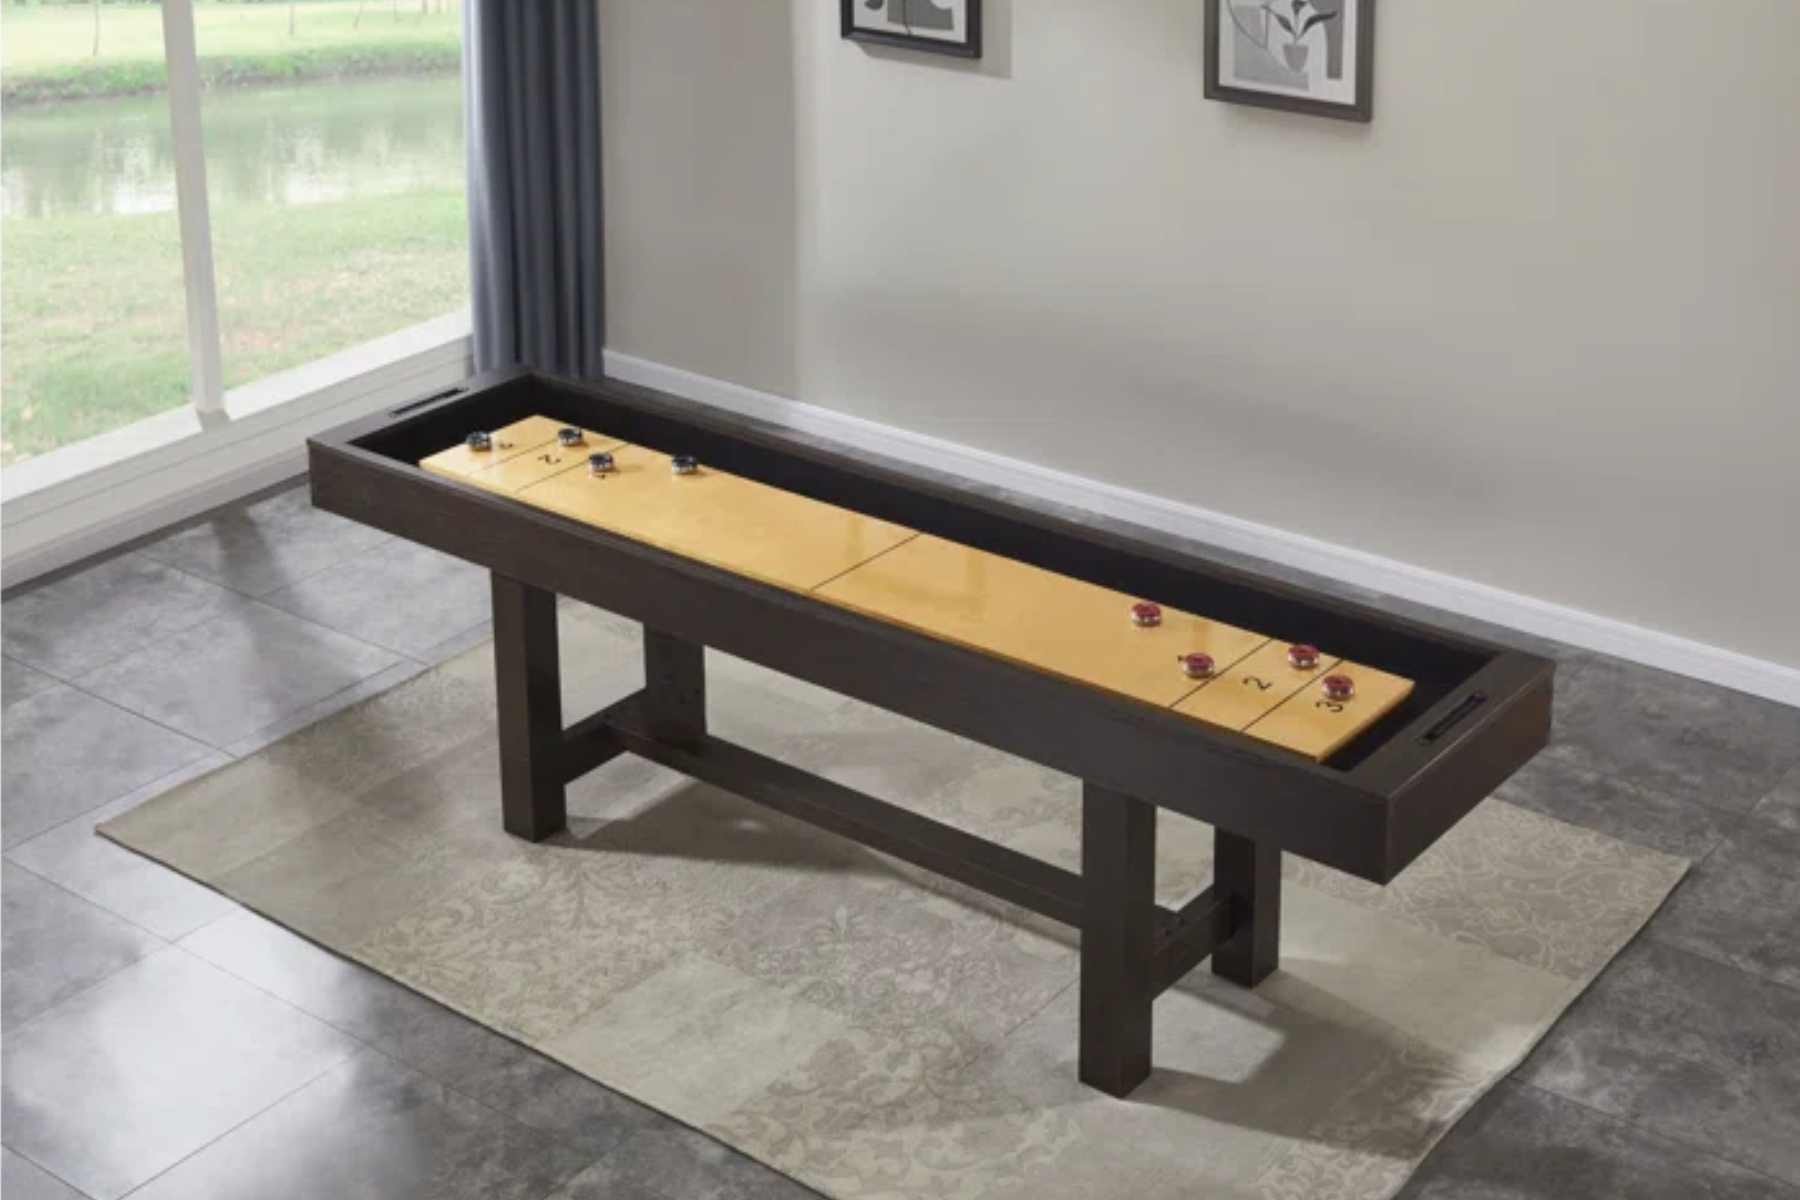 A shuffleboard table of reduced dimensions is placed inside a room